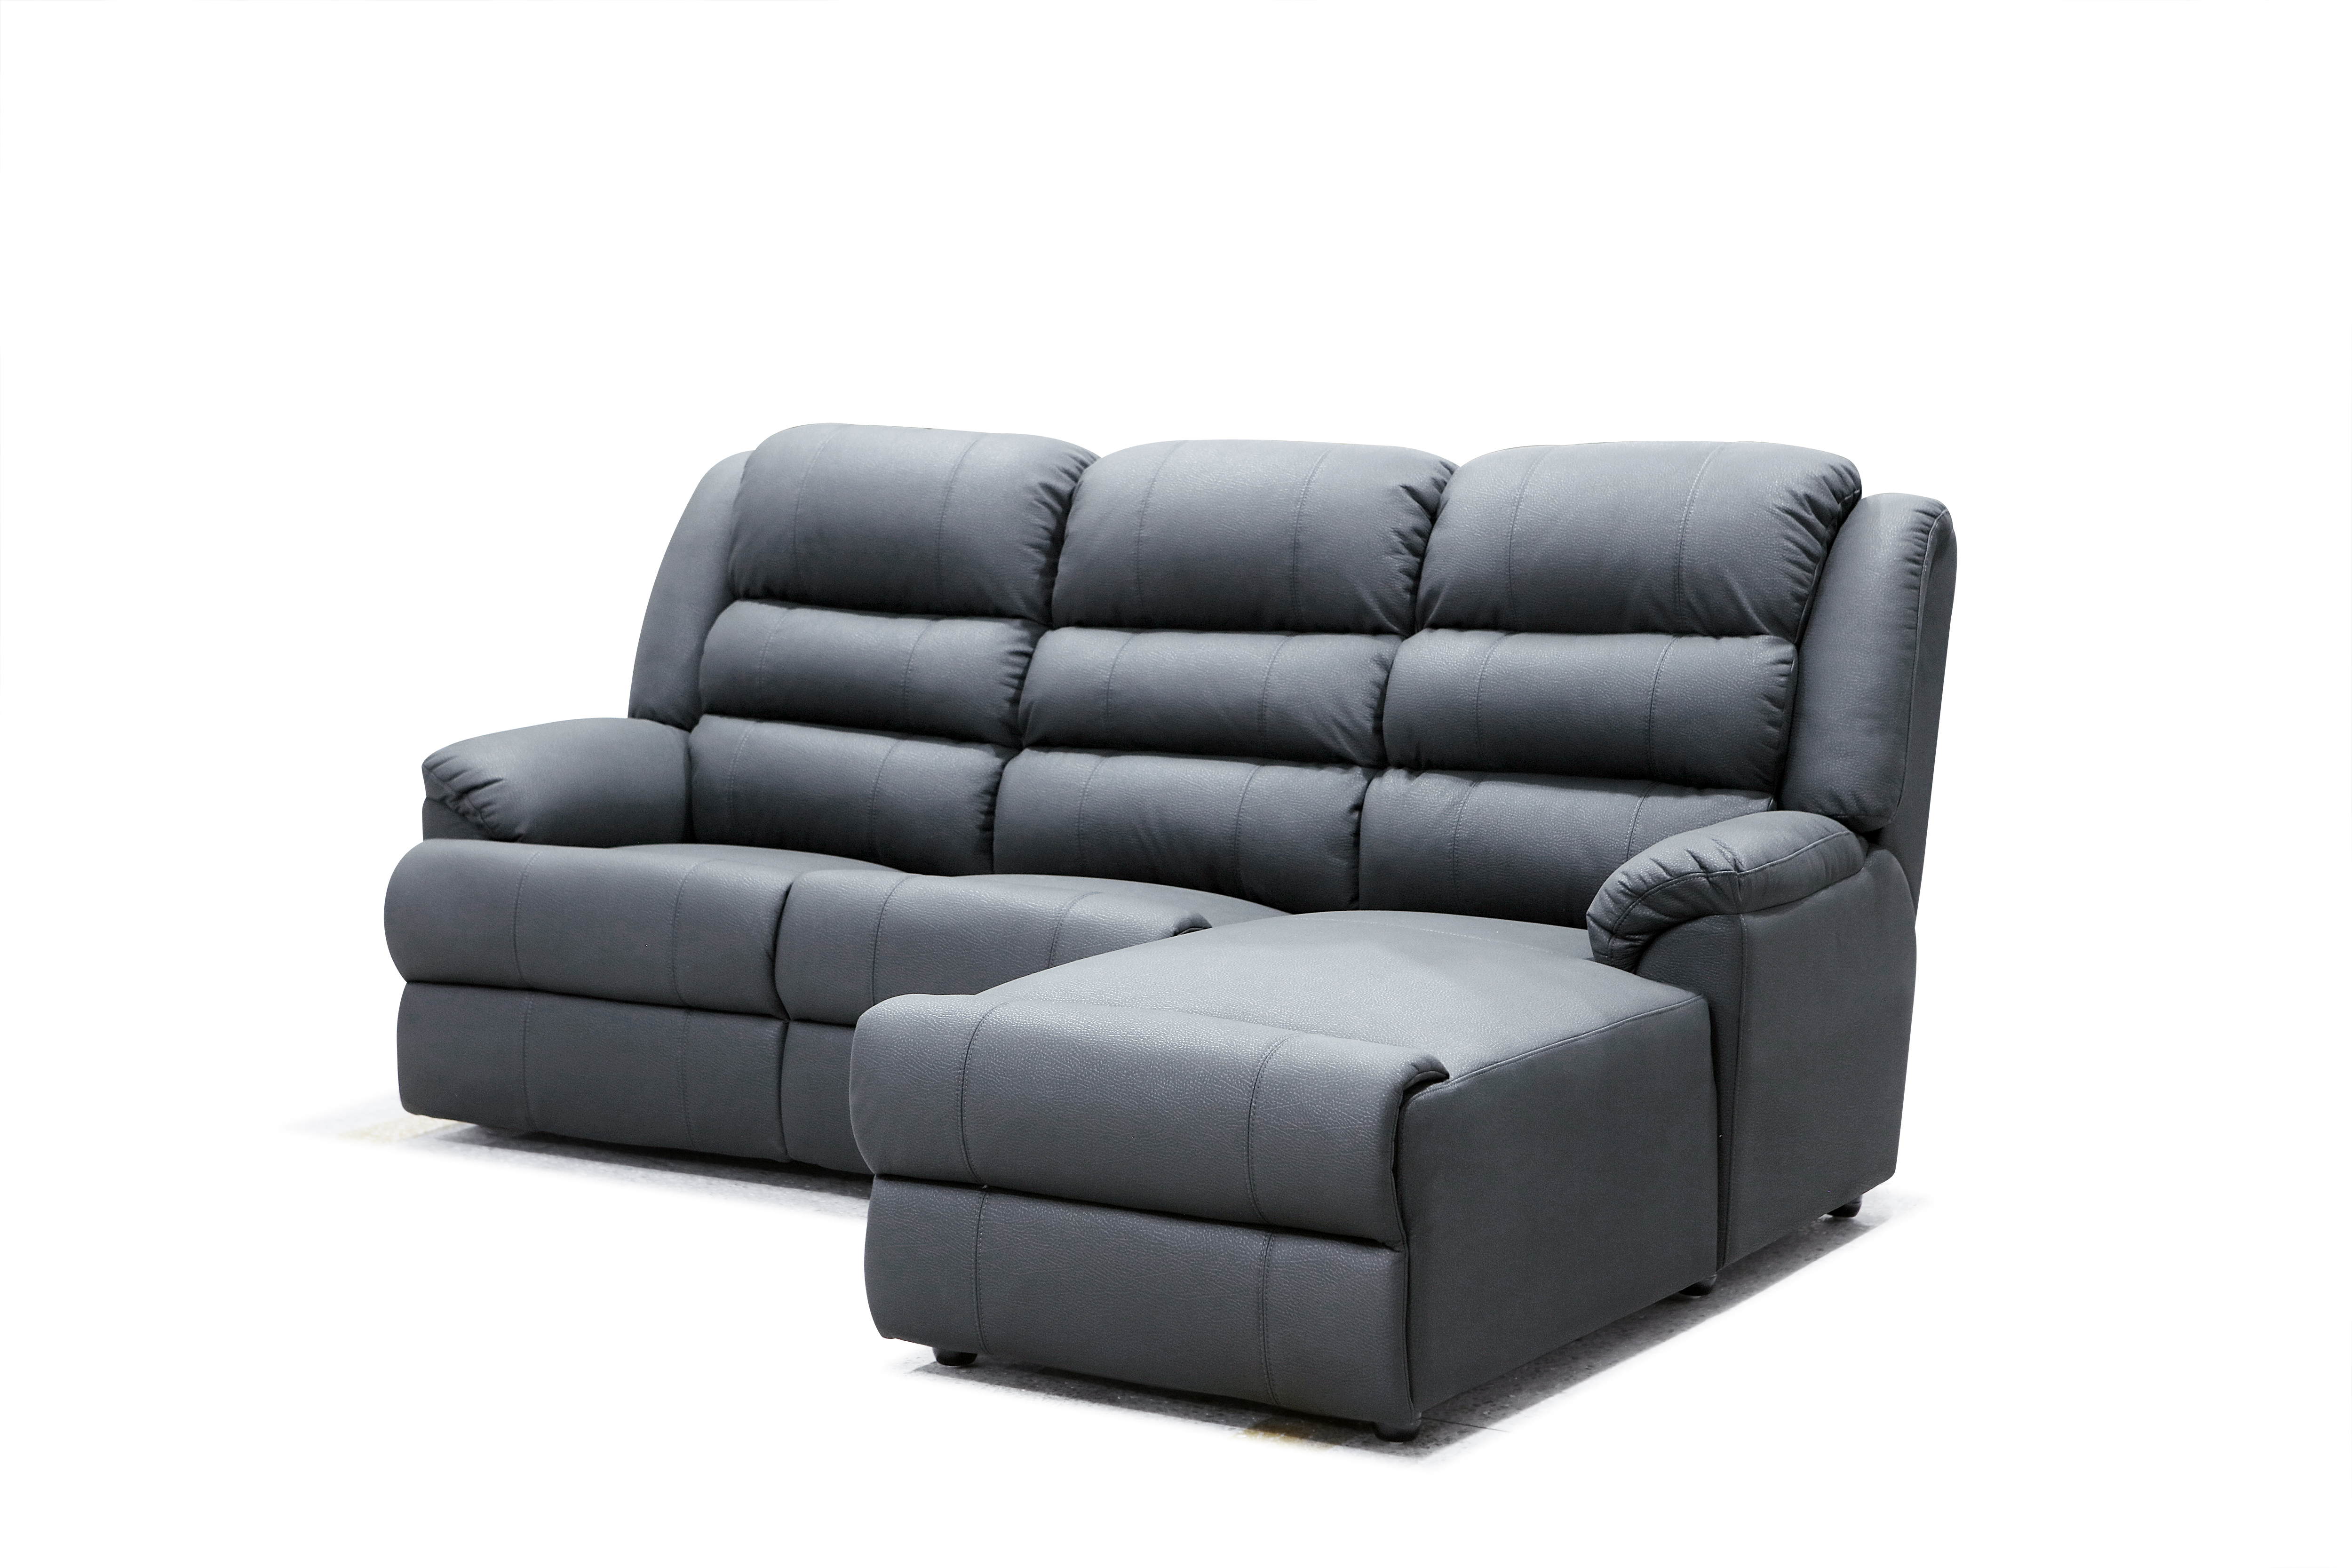 Summitt - 3 Seater Chaise Charcoal 1